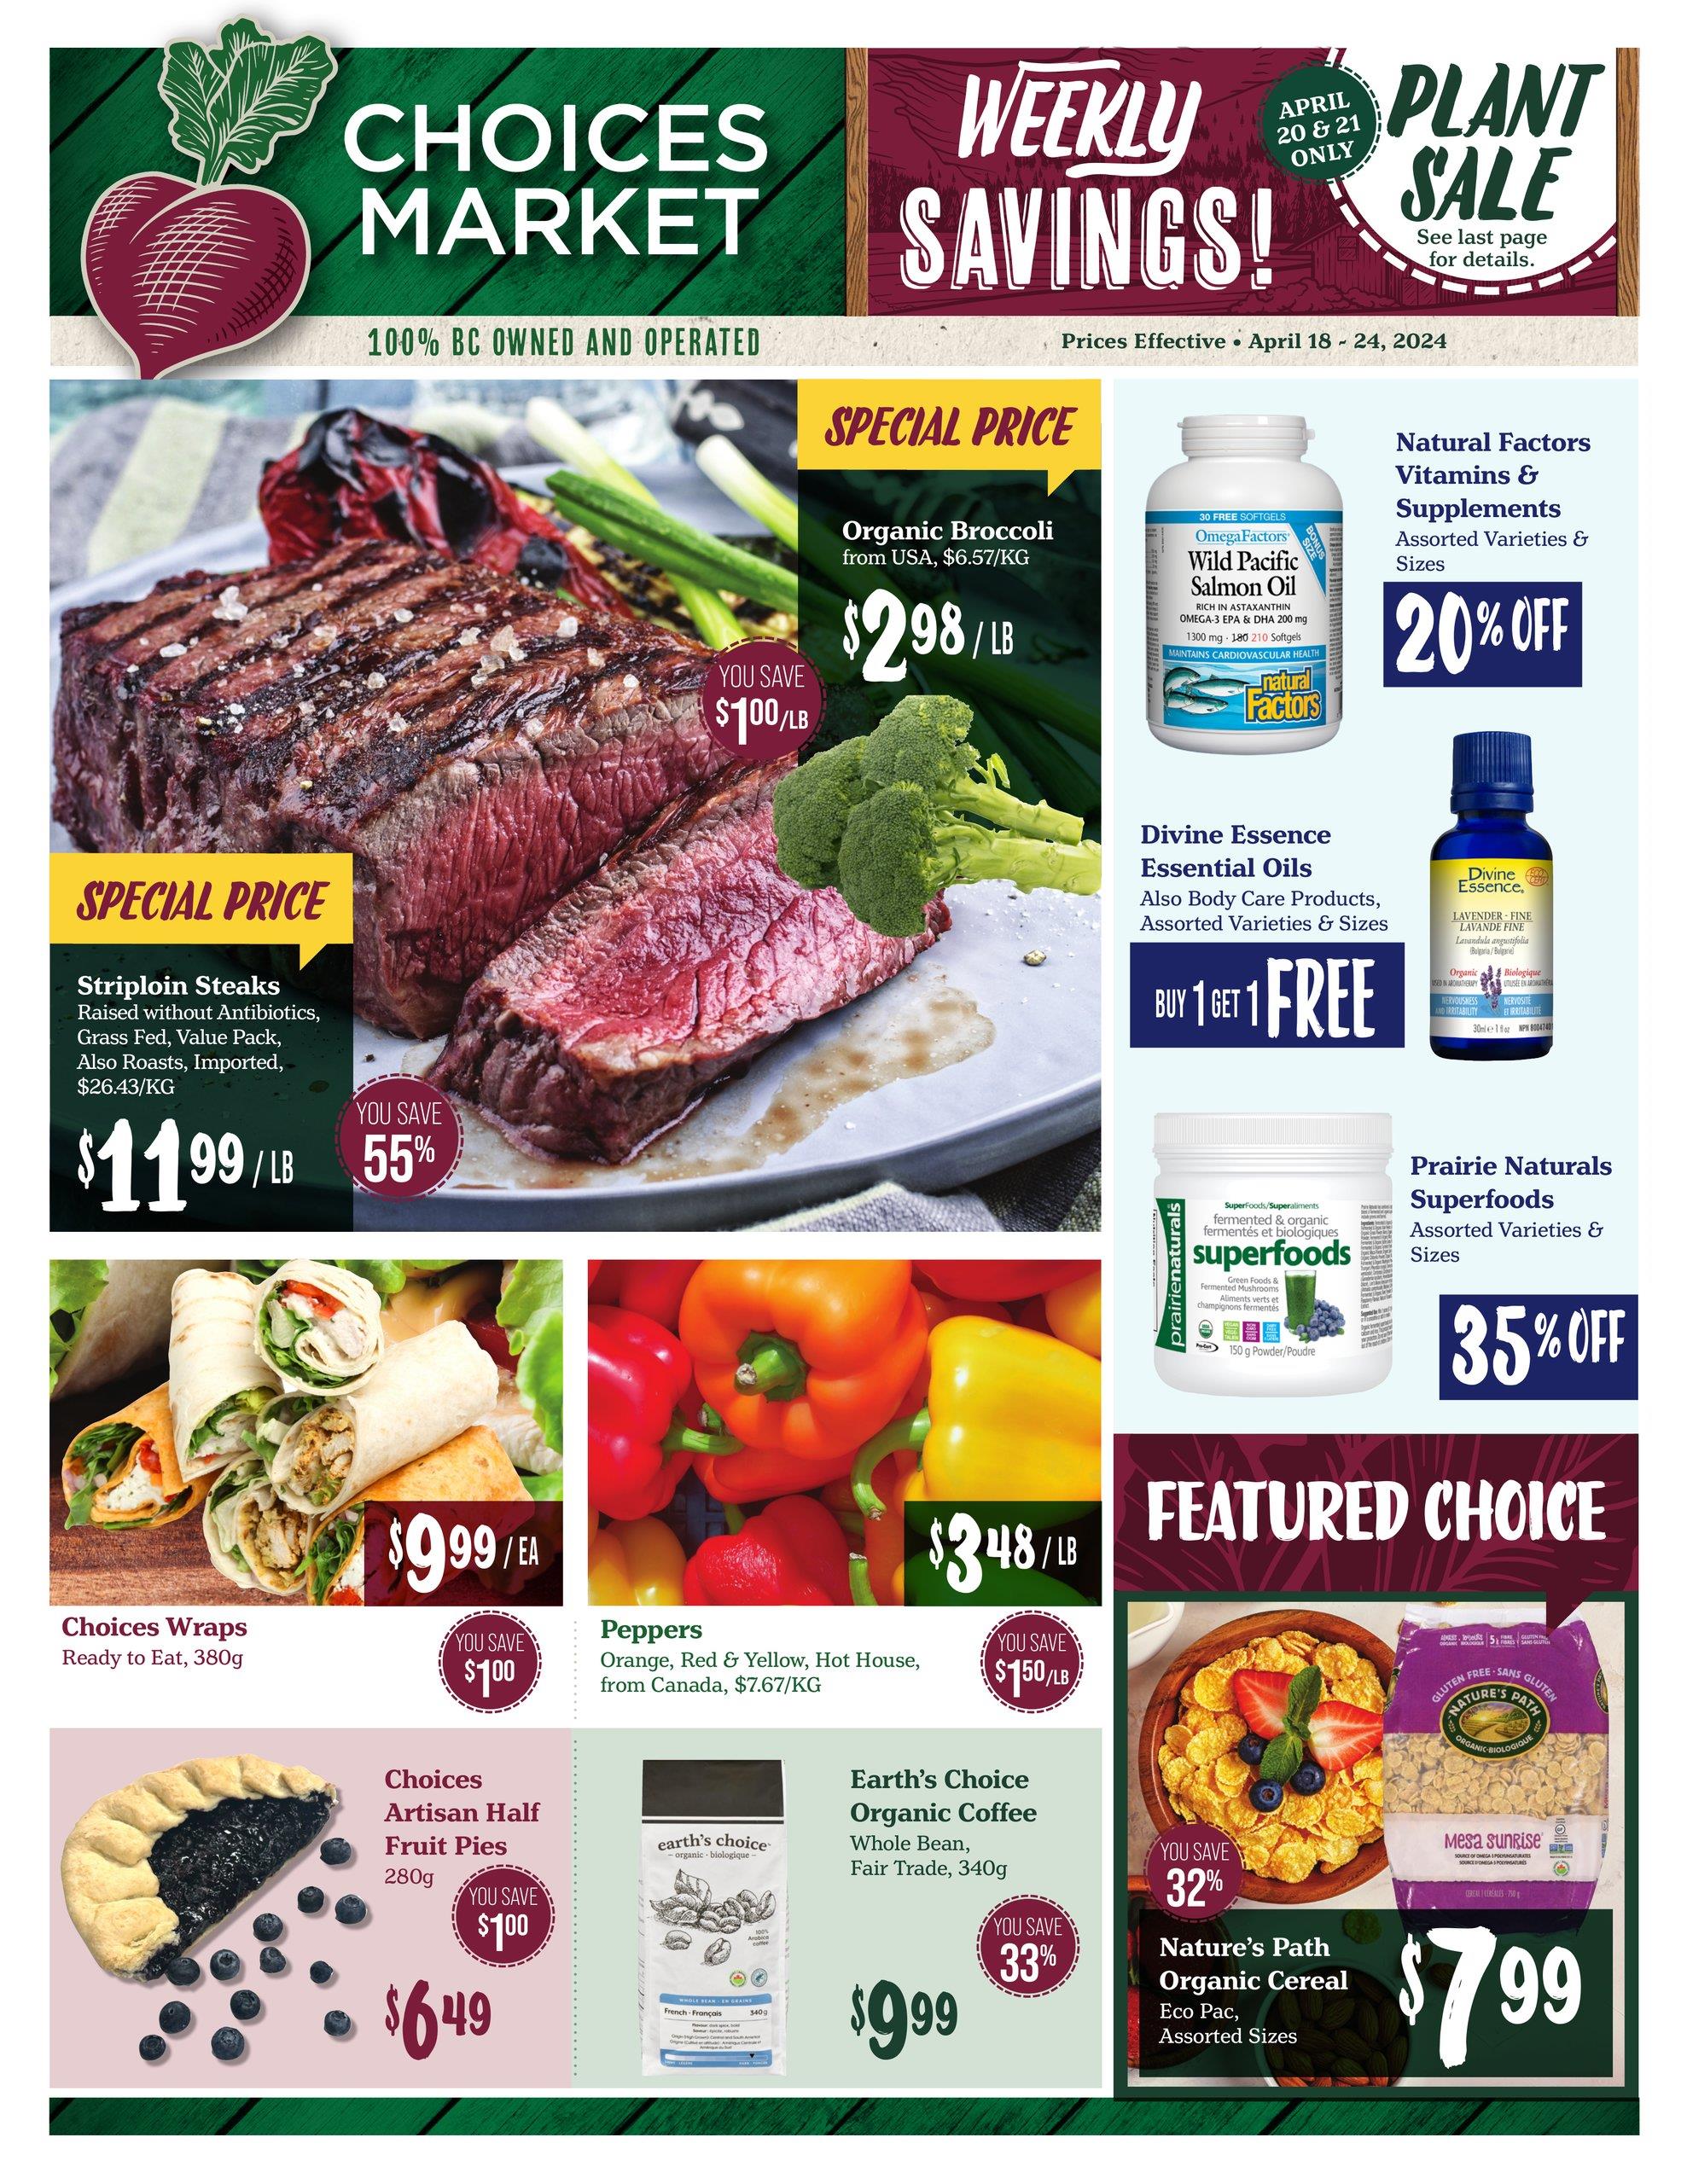 Choices Markets - Weekly Flyer Specials